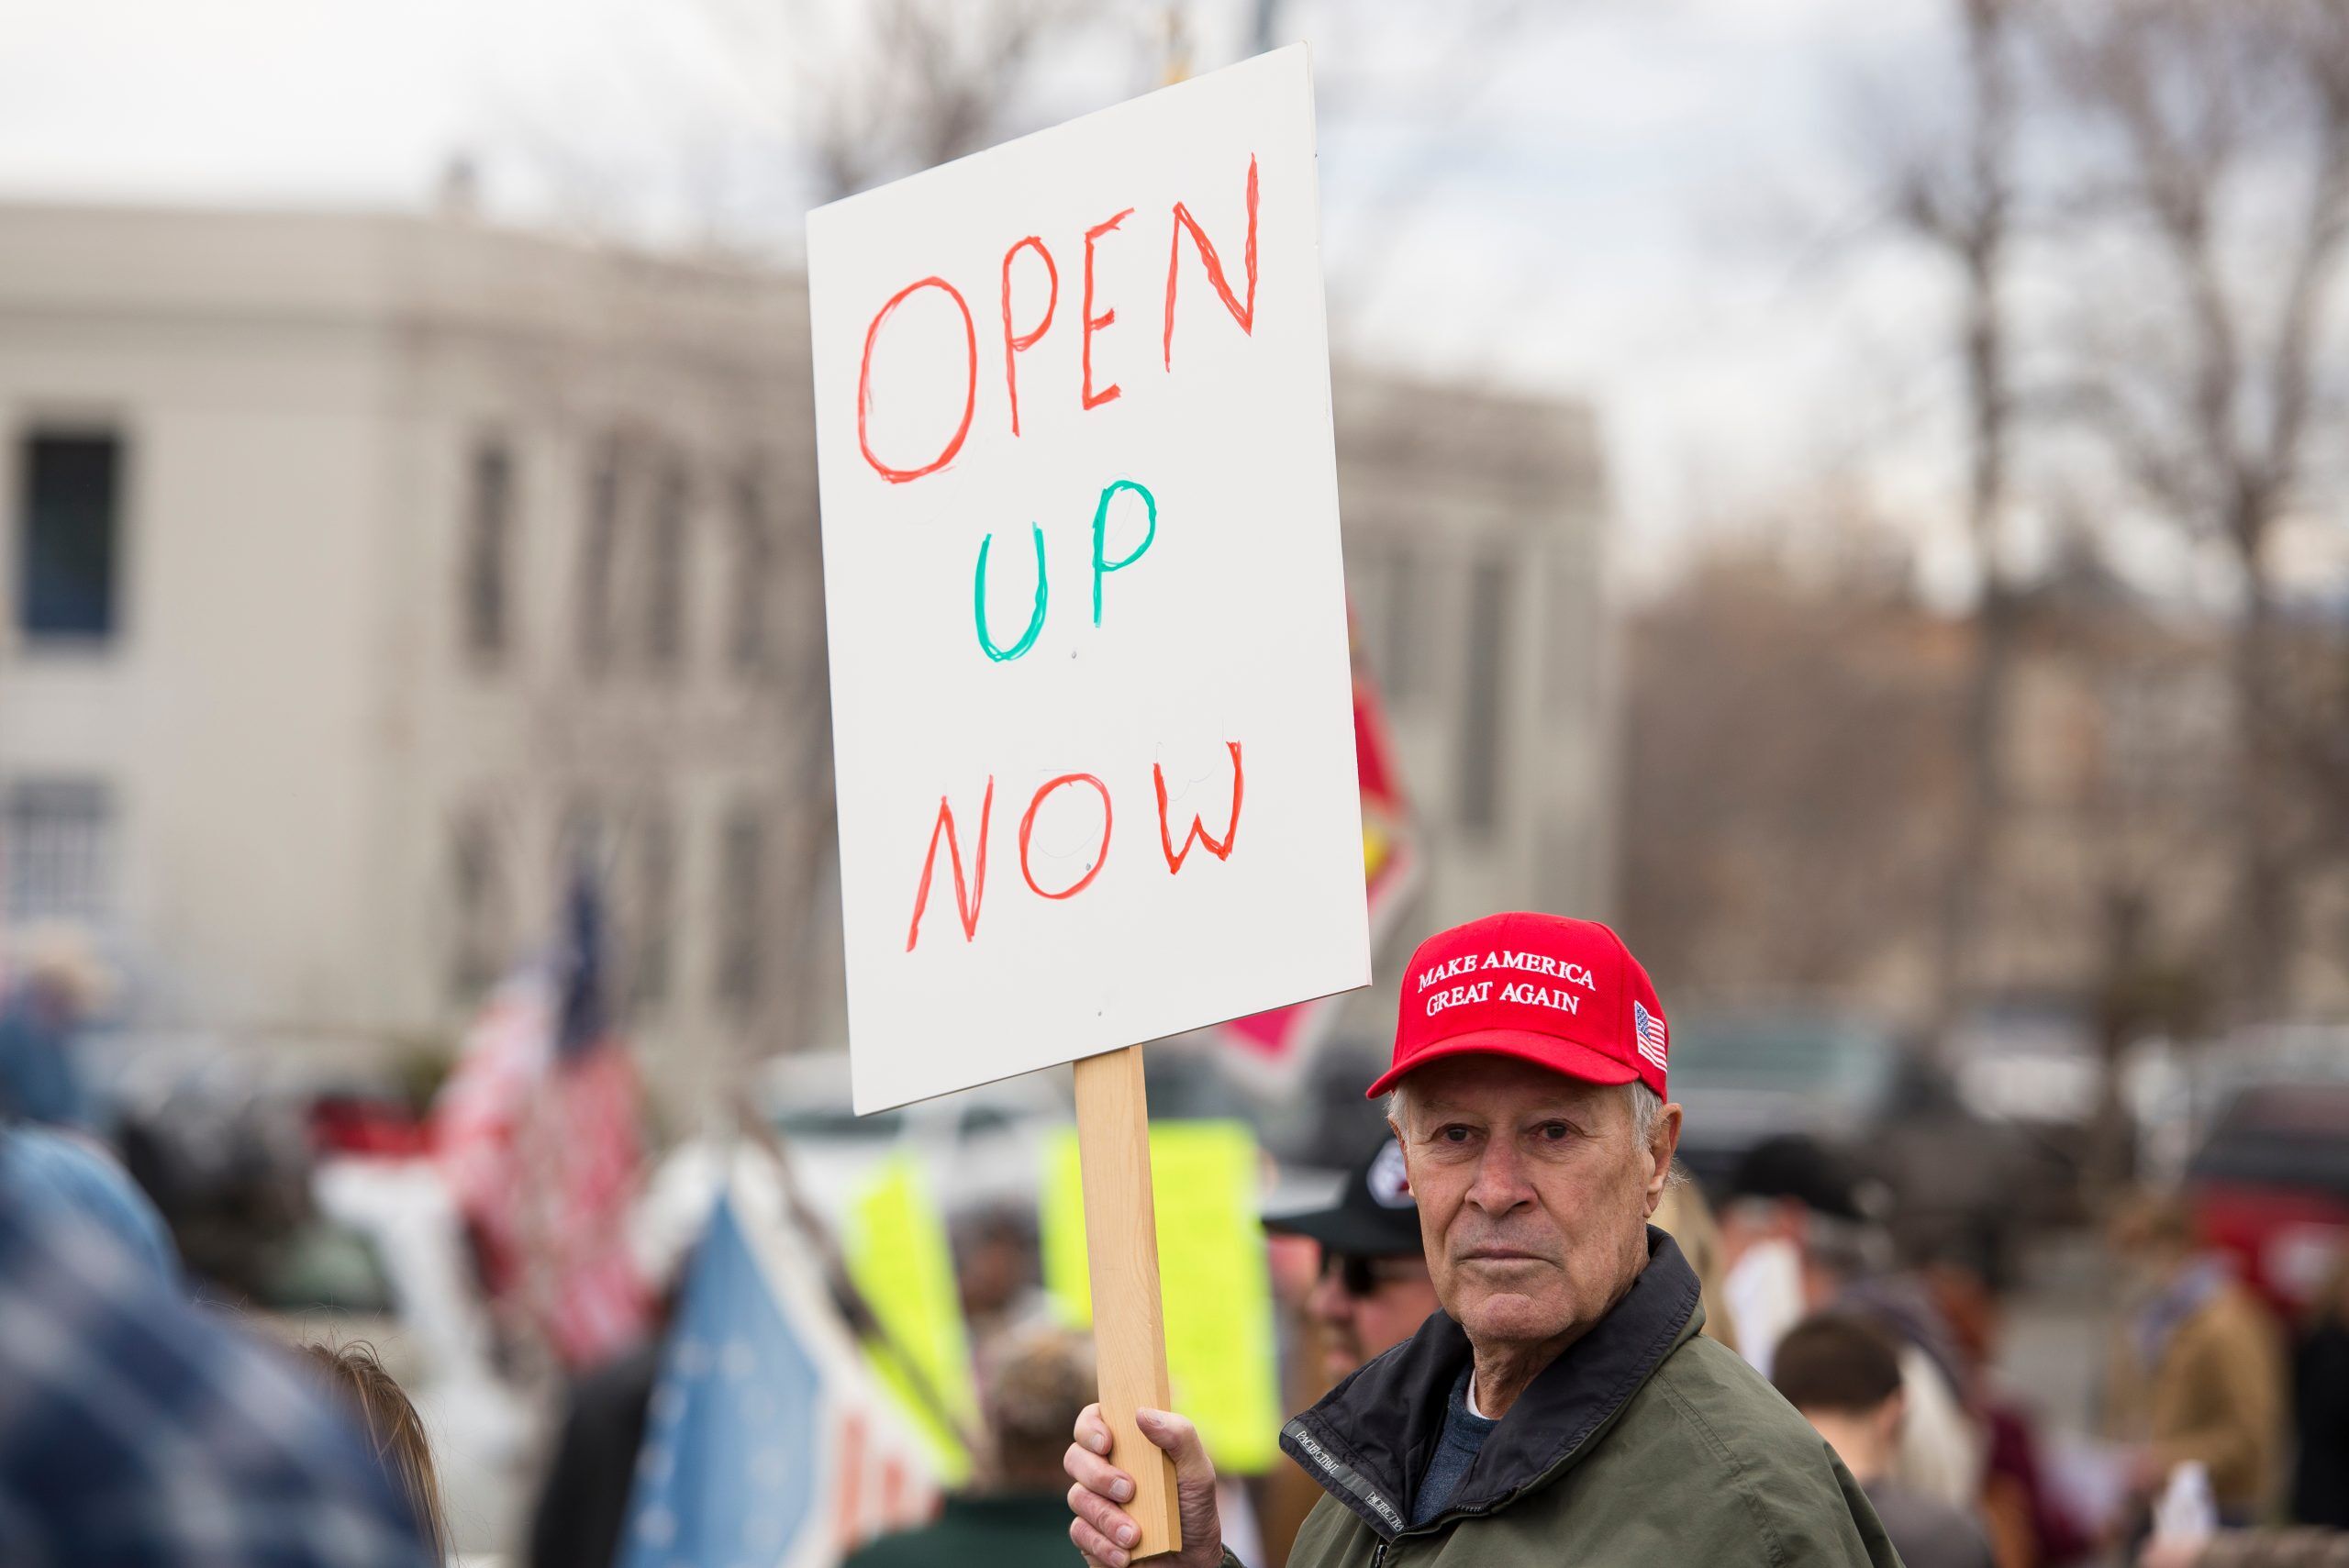 Helena, Montana - April 19, 2020: Protestor holding sign at a protest rally over the shutdown and stay at home orders due to cautions about Coronavirus.